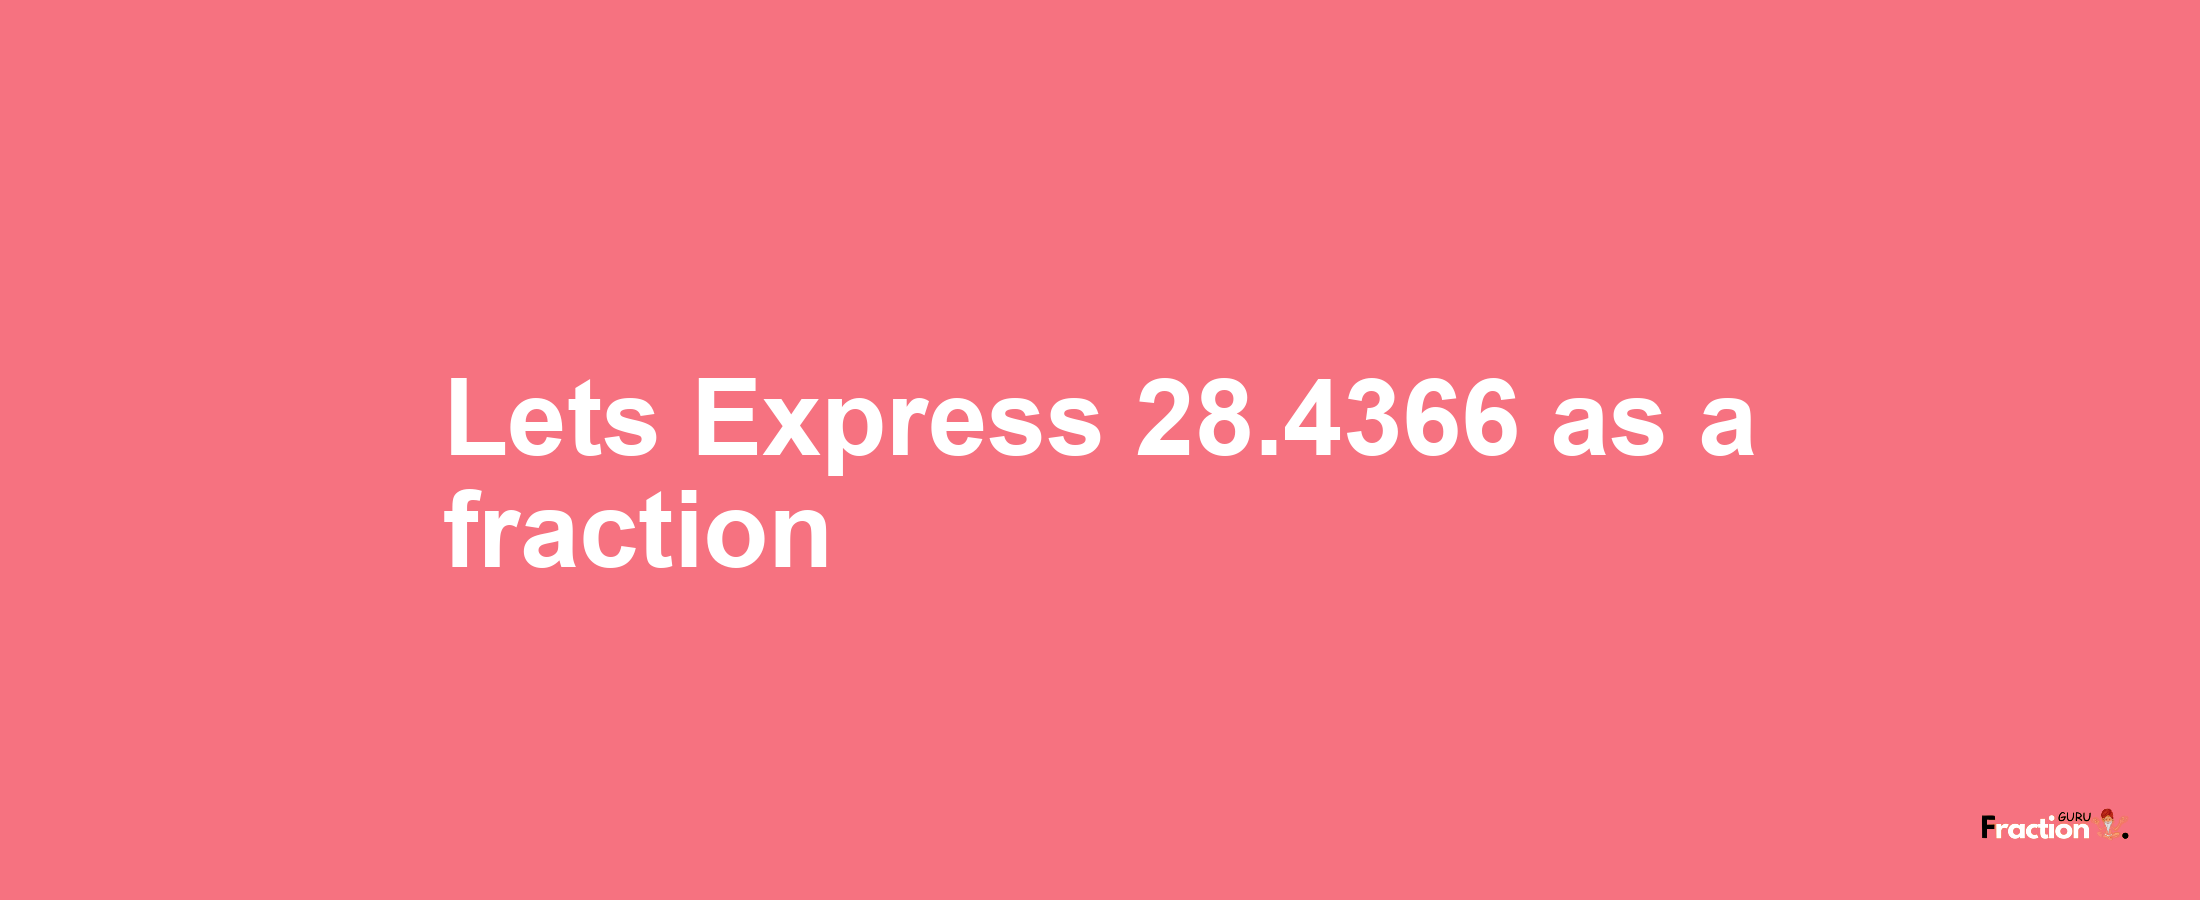 Lets Express 28.4366 as afraction